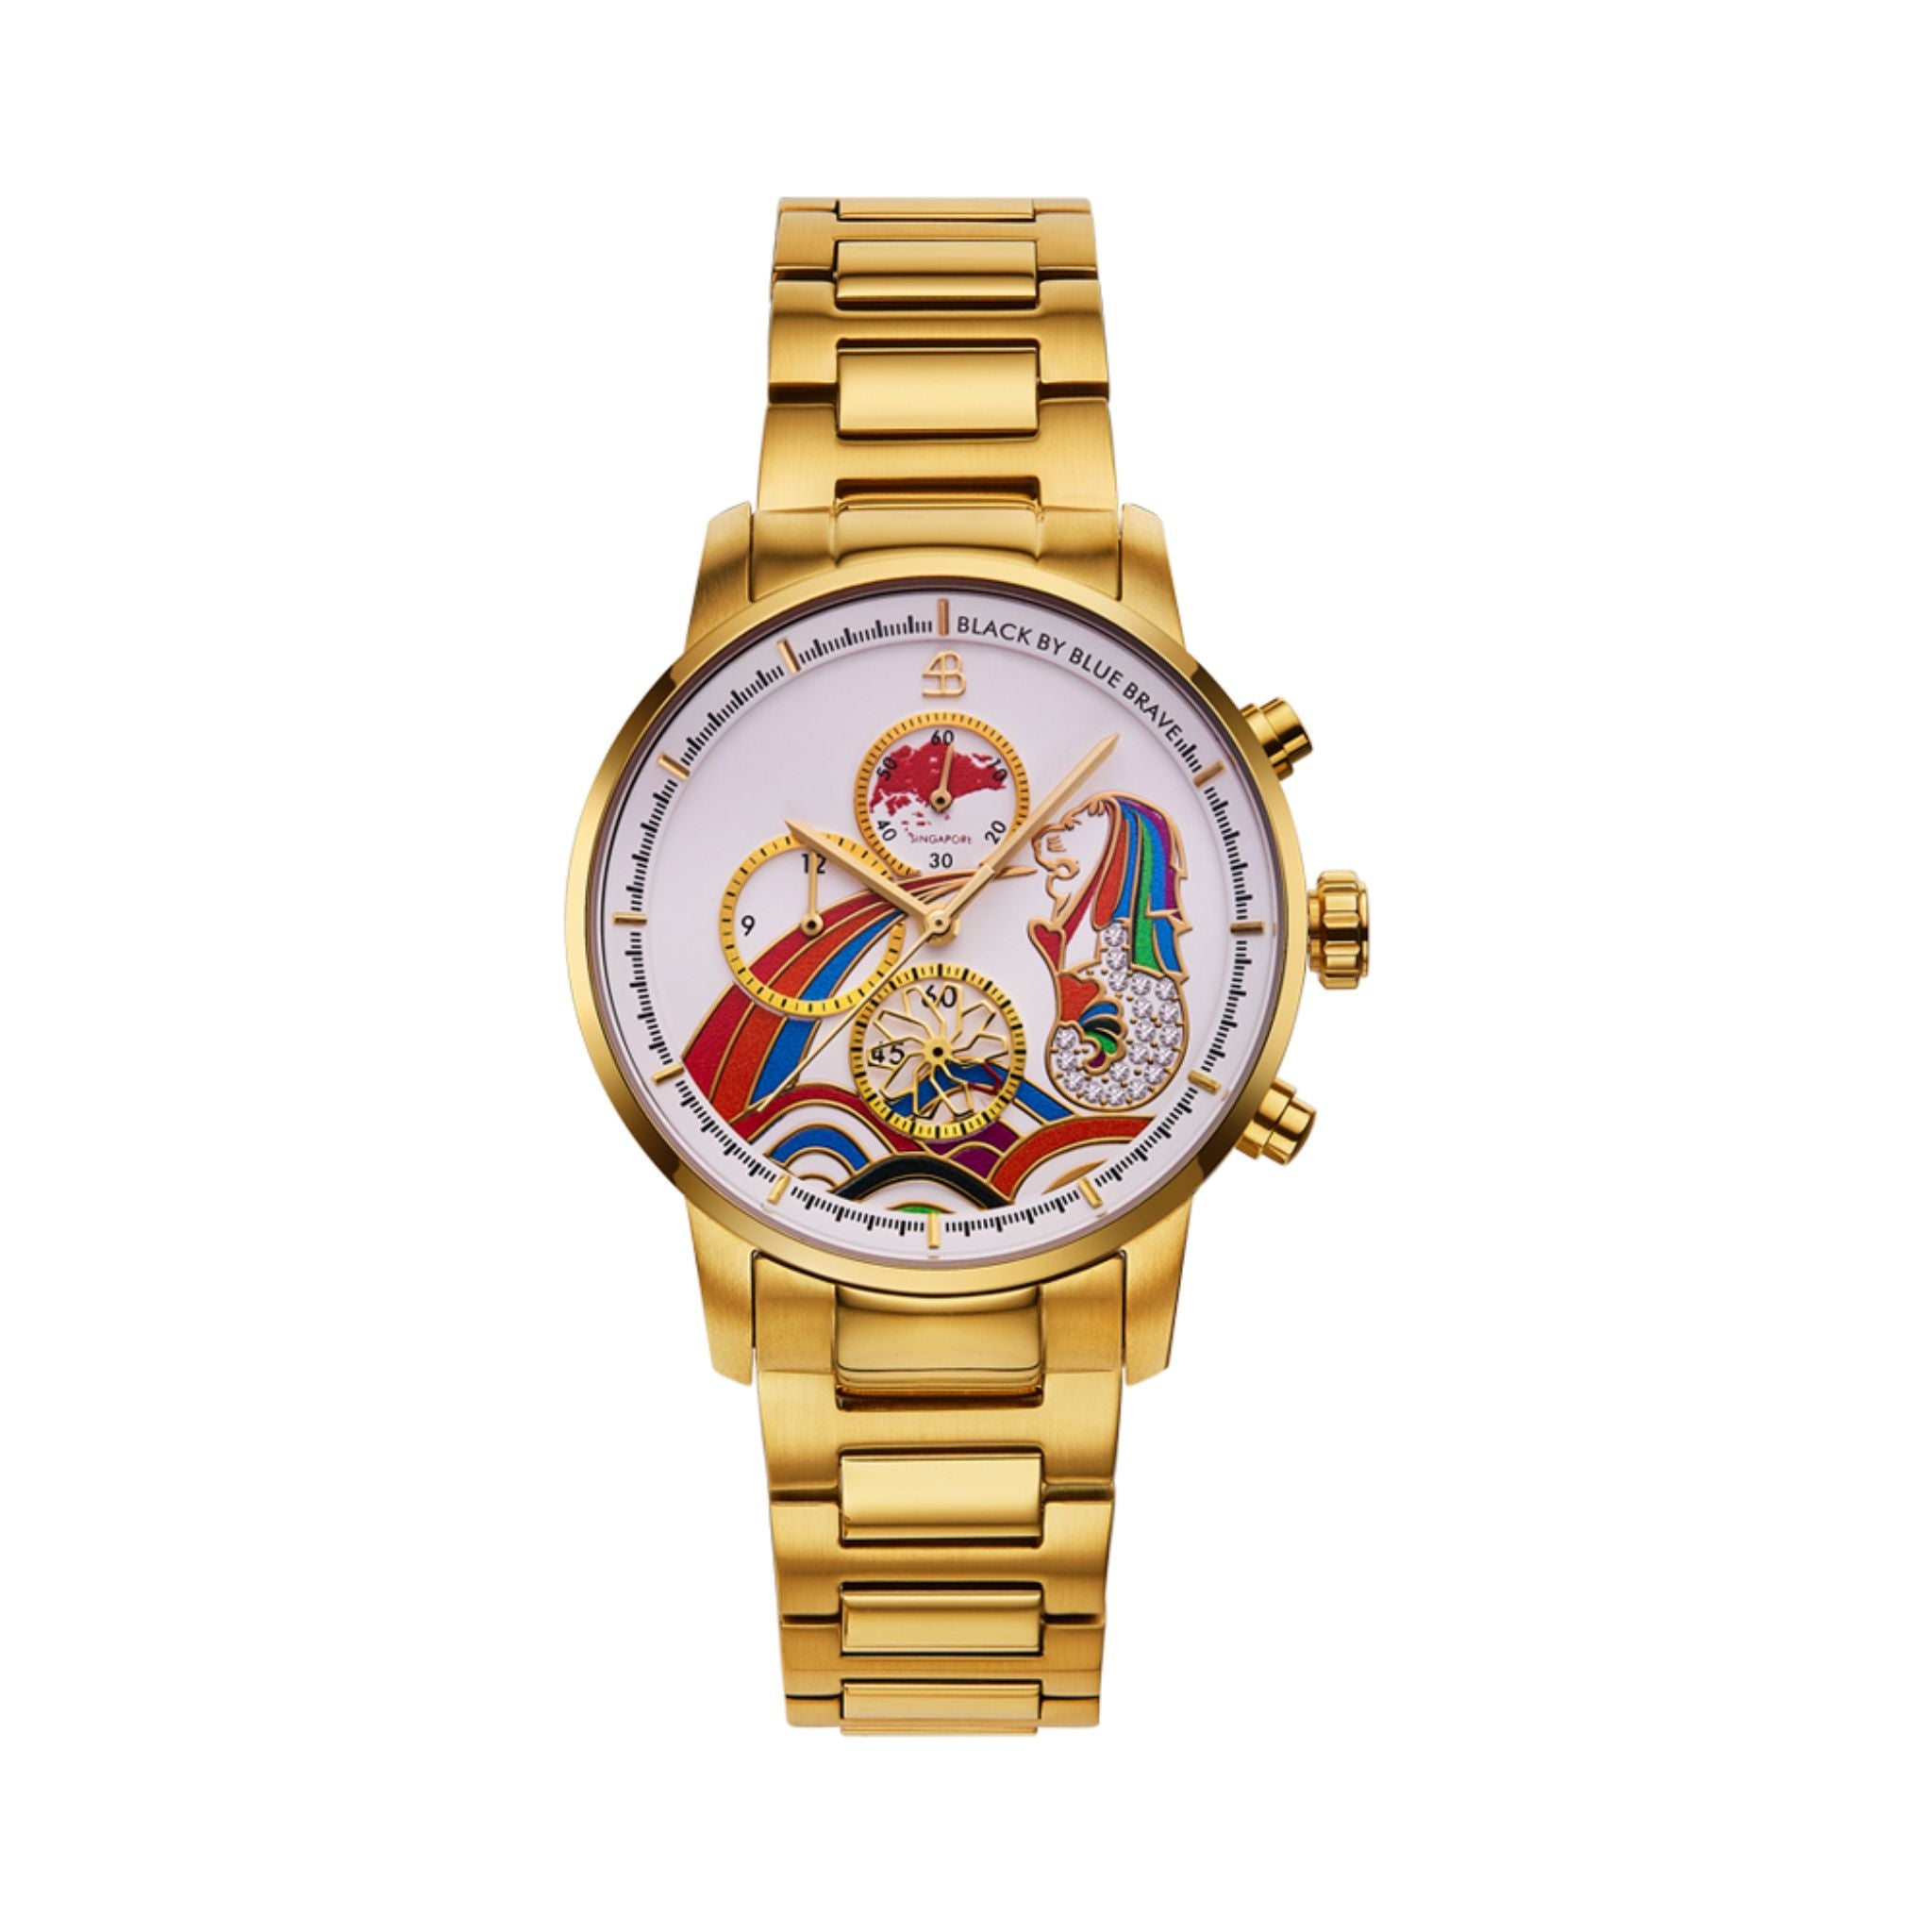 4B (Black By Blue Brave) Merlion Watch (Gold with Multi-Colored Accents)